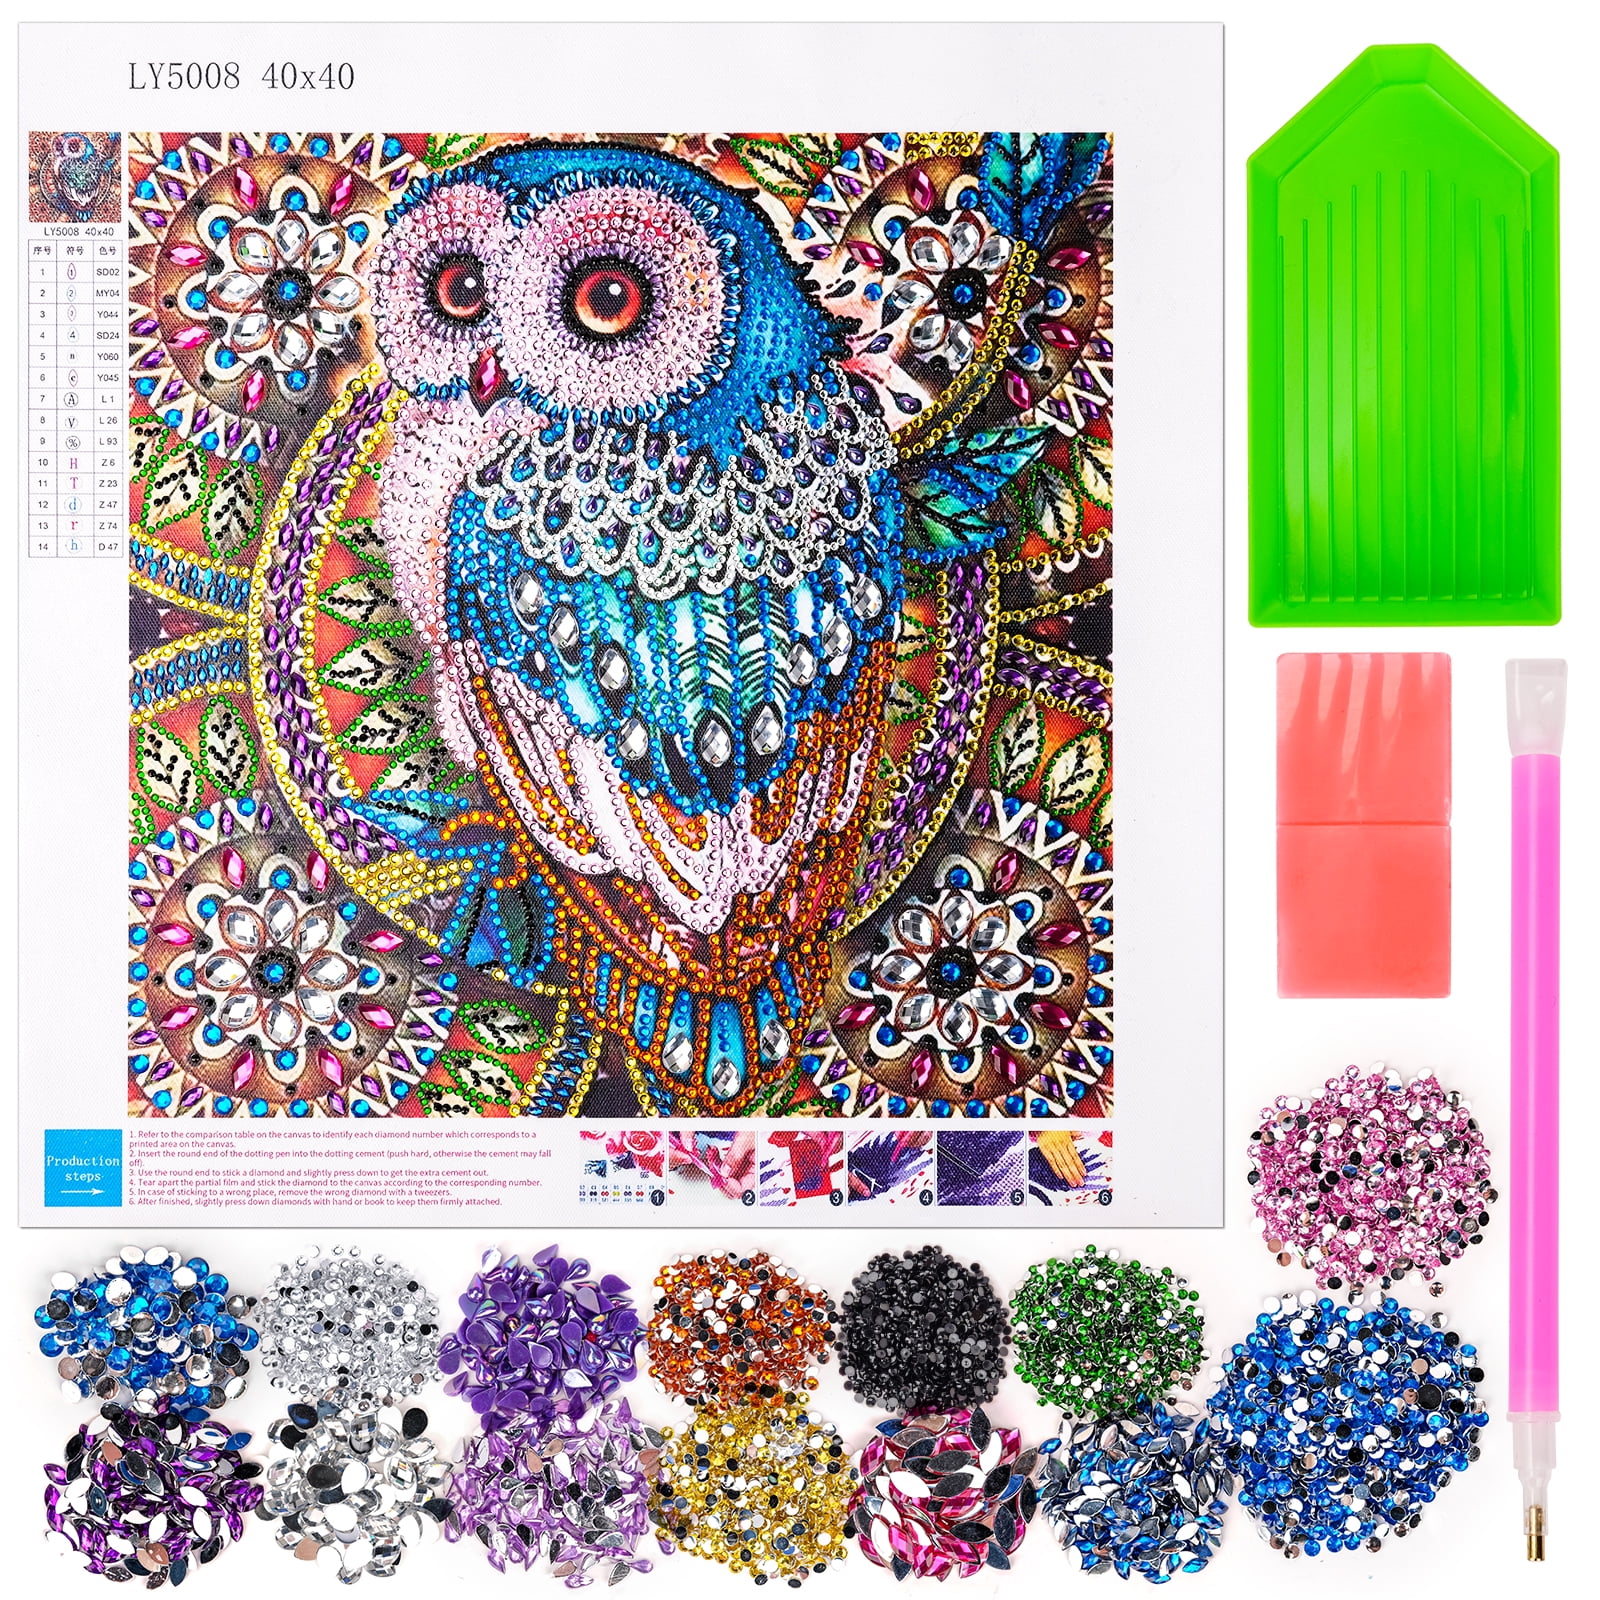  Easy 5D Panda Diamond Painting Kit for Kids Beginners Diamond  Art Kits for Boys&Girls Painting Accessories Tools Gem Art Painting kit  Diamond Art for Kids Ages 6-8-12+ : Arts, Crafts 